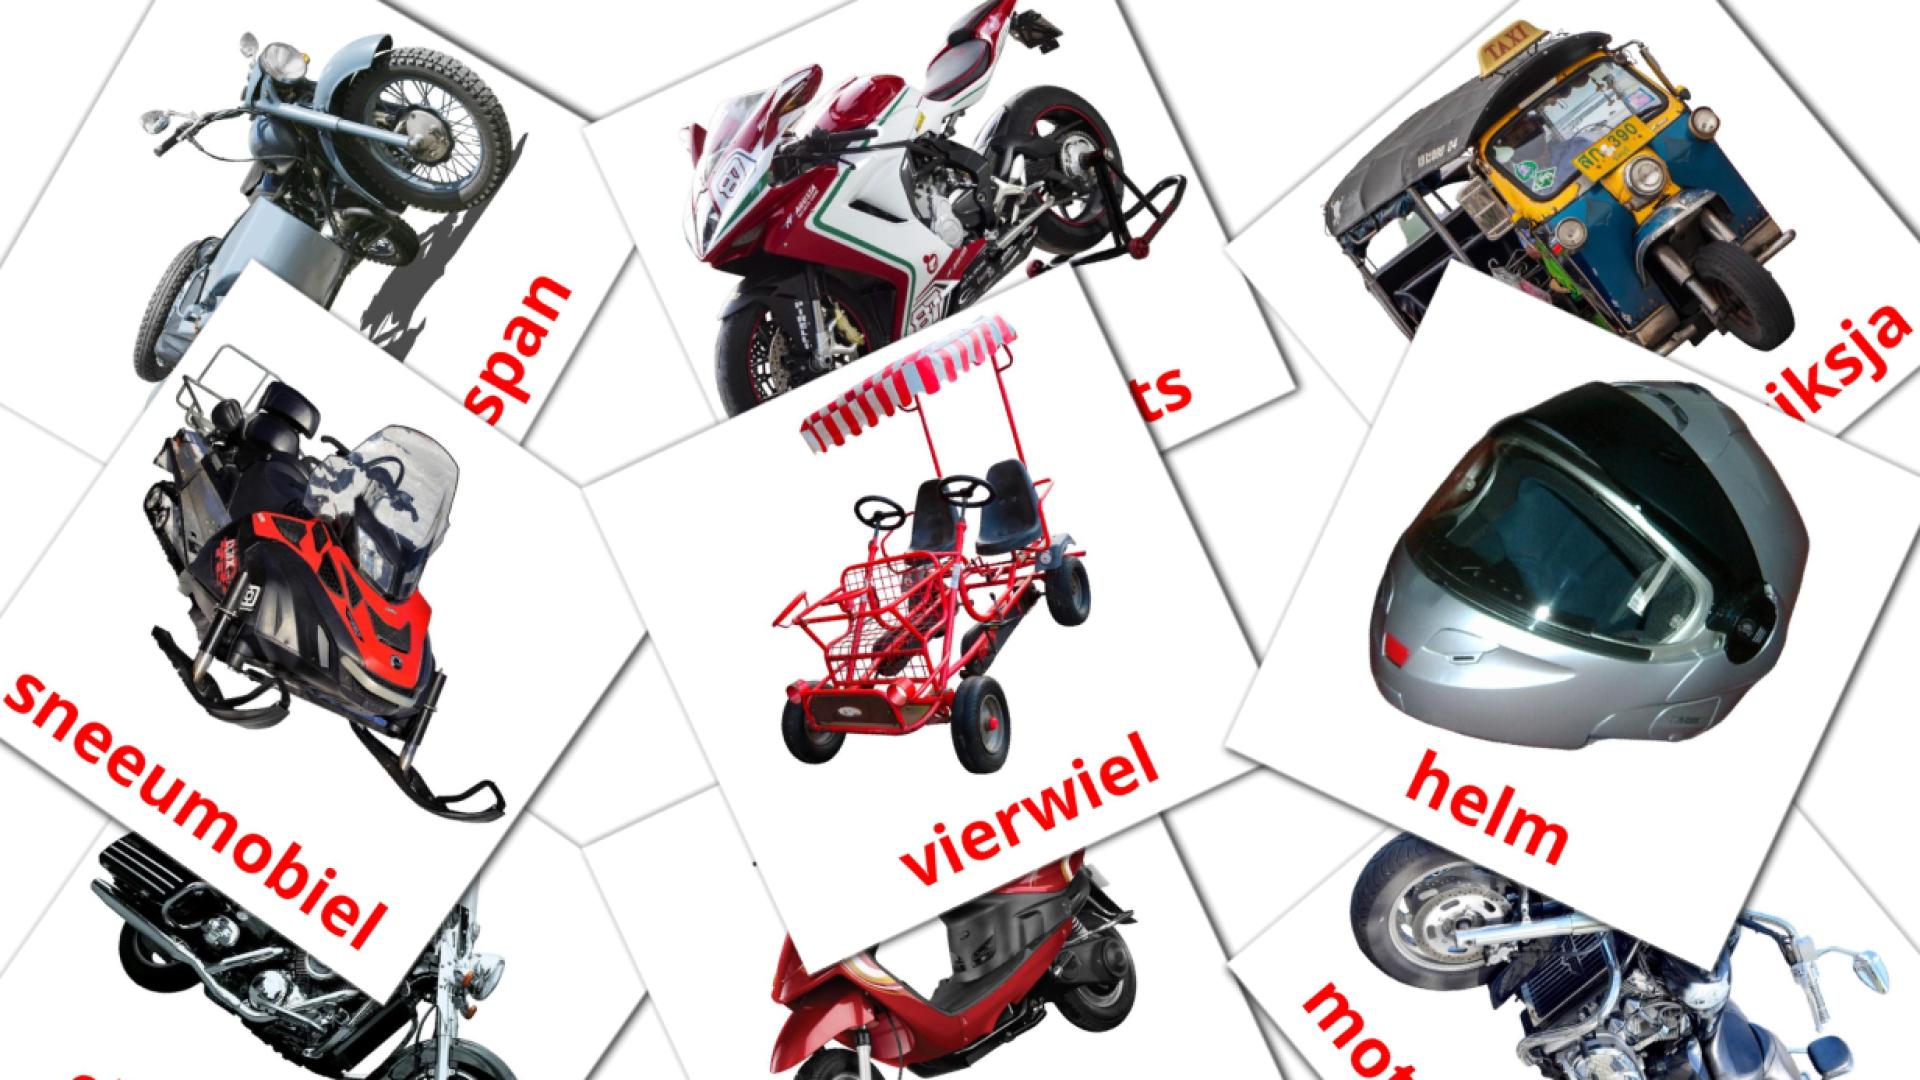 Motorcycles - afrikaans vocabulary cards